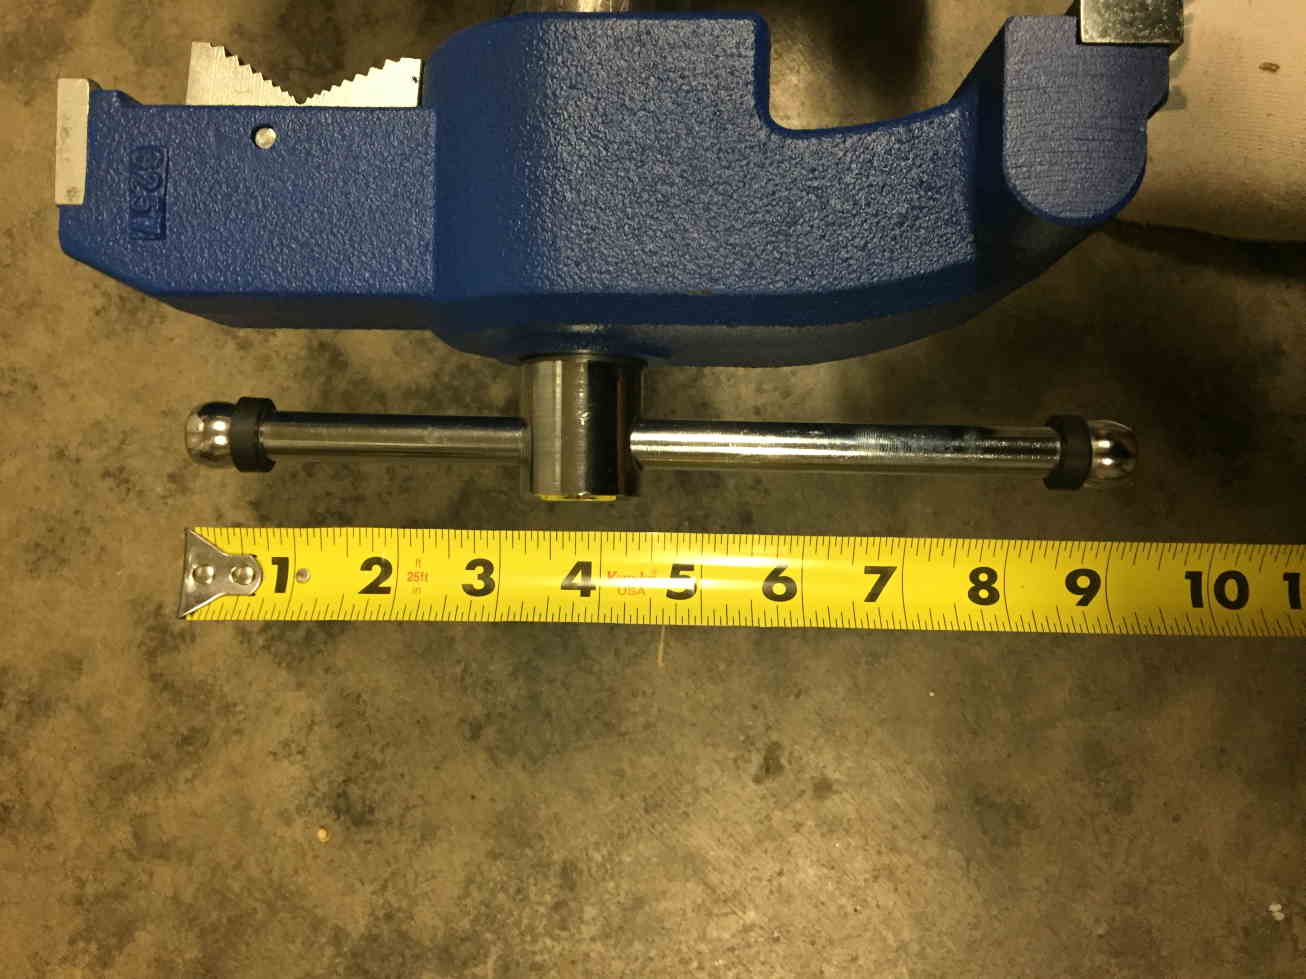 An image measuring the length of the yost 750-Di lead screw handle